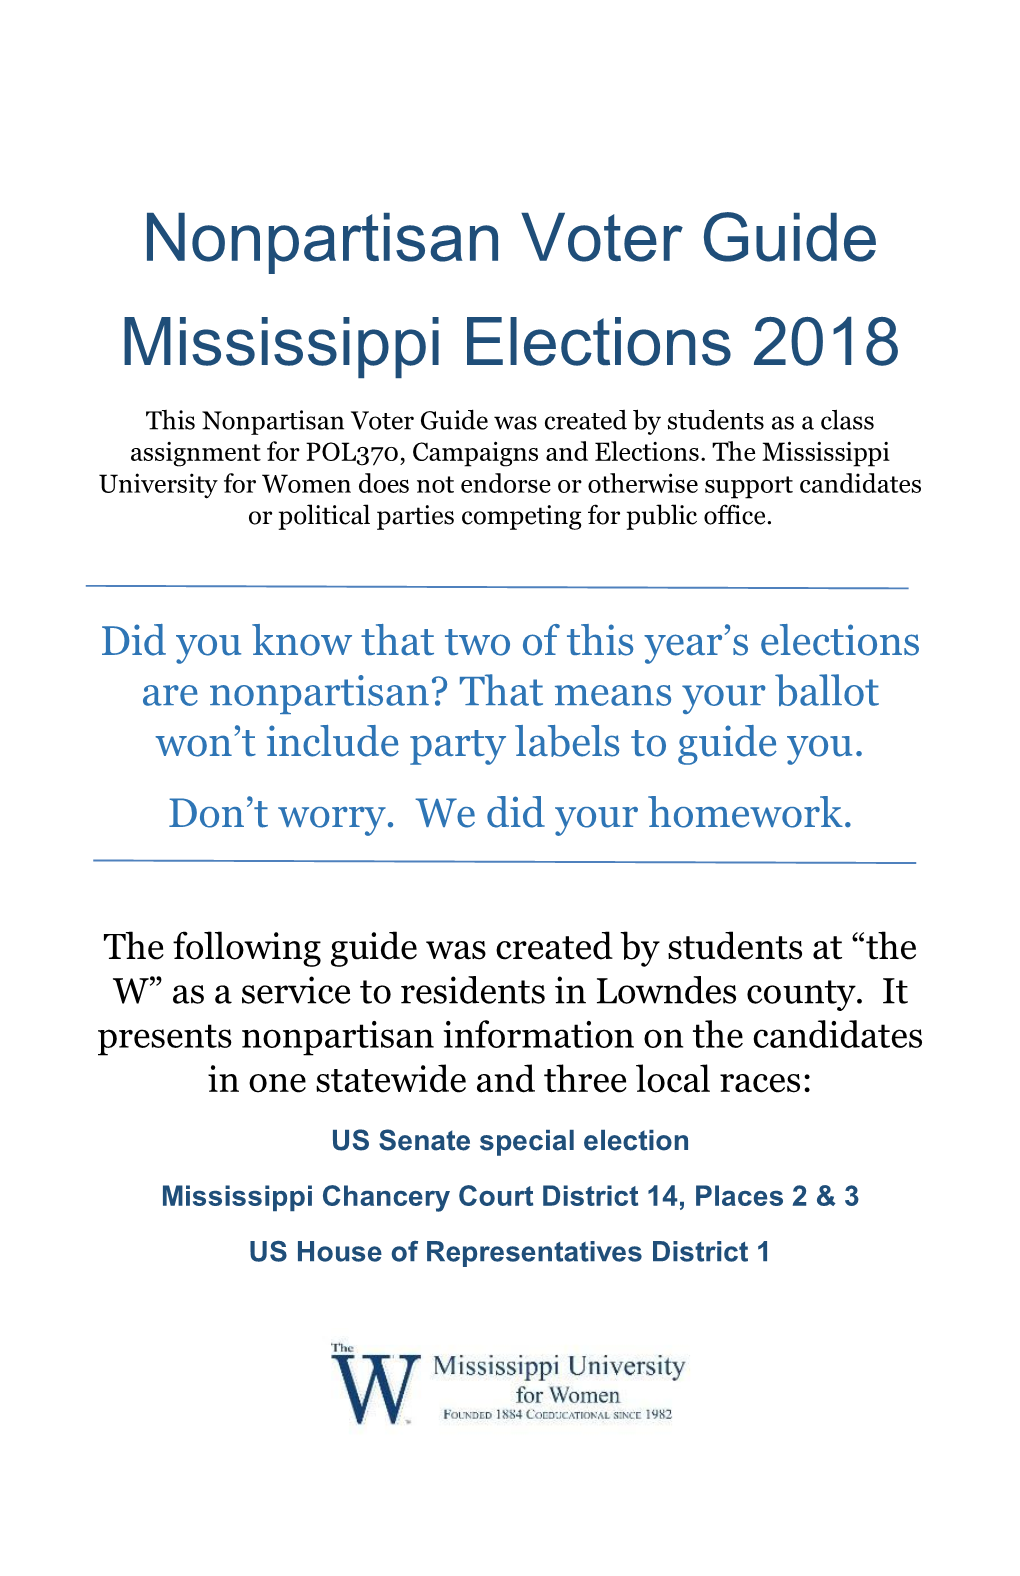 Nonpartisan Voter Guide Mississippi Elections 2018